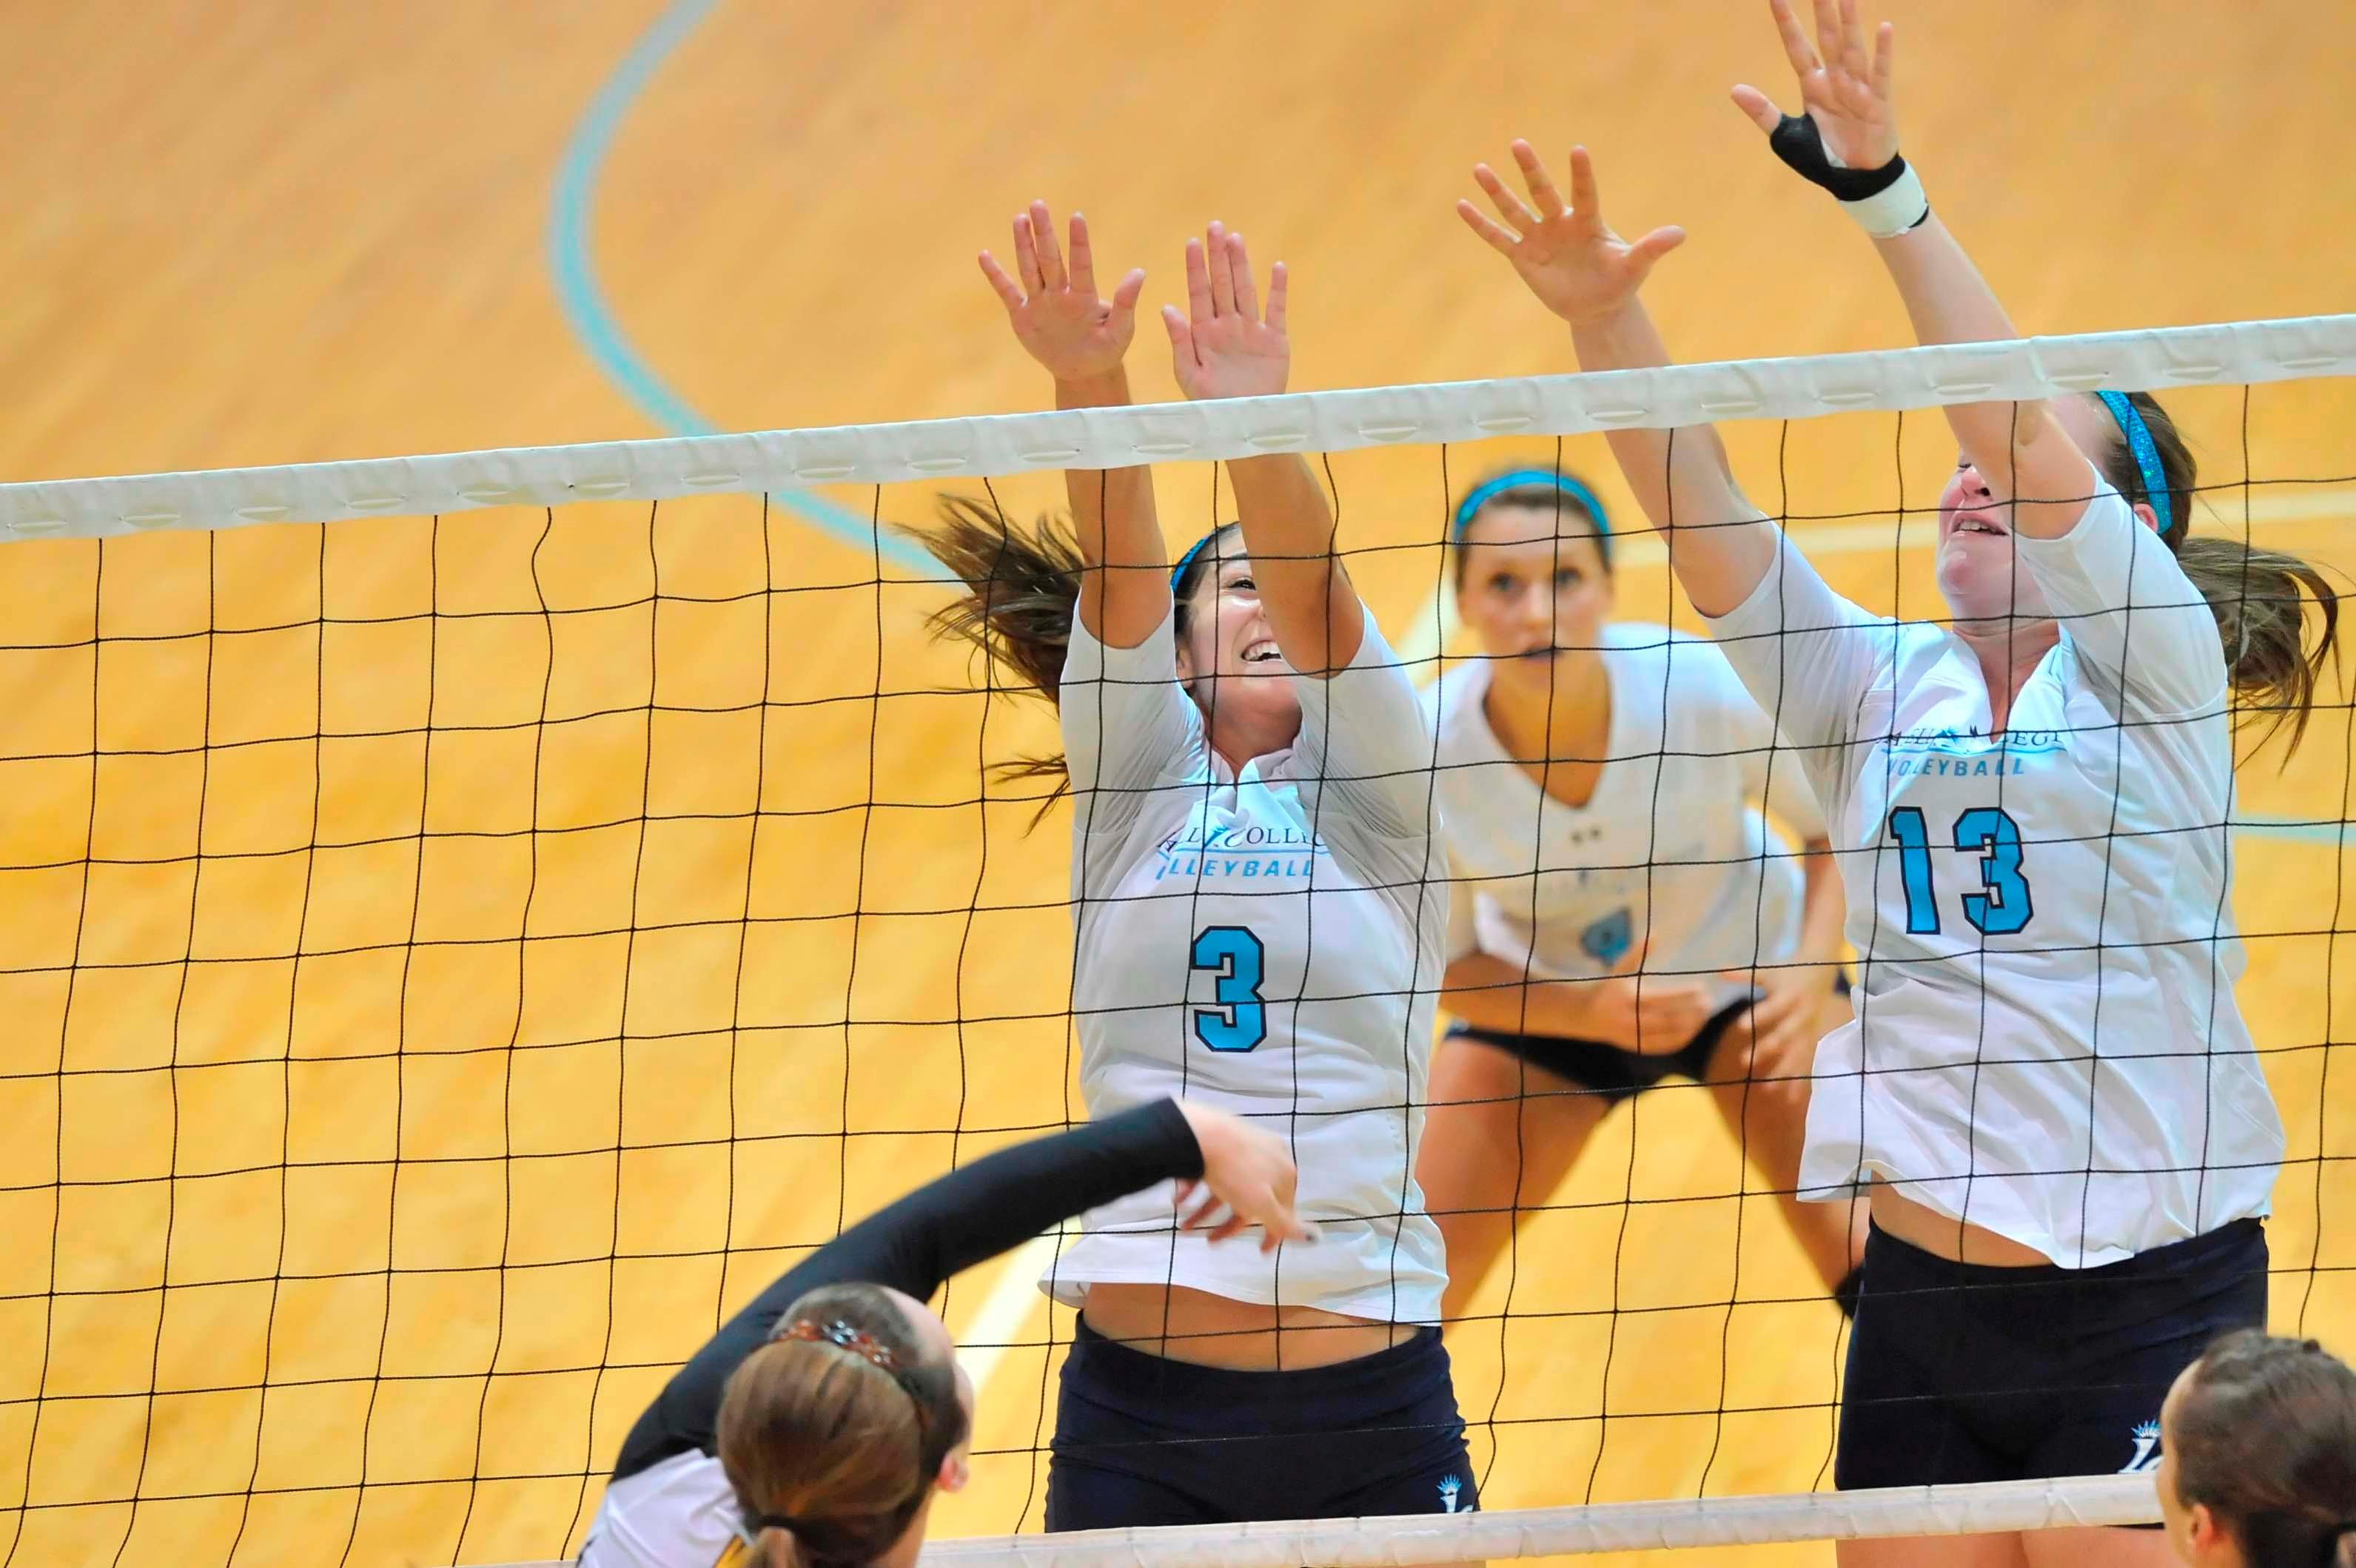 Regis Topples Lasell, 3-0 in Women's Volleyball Action